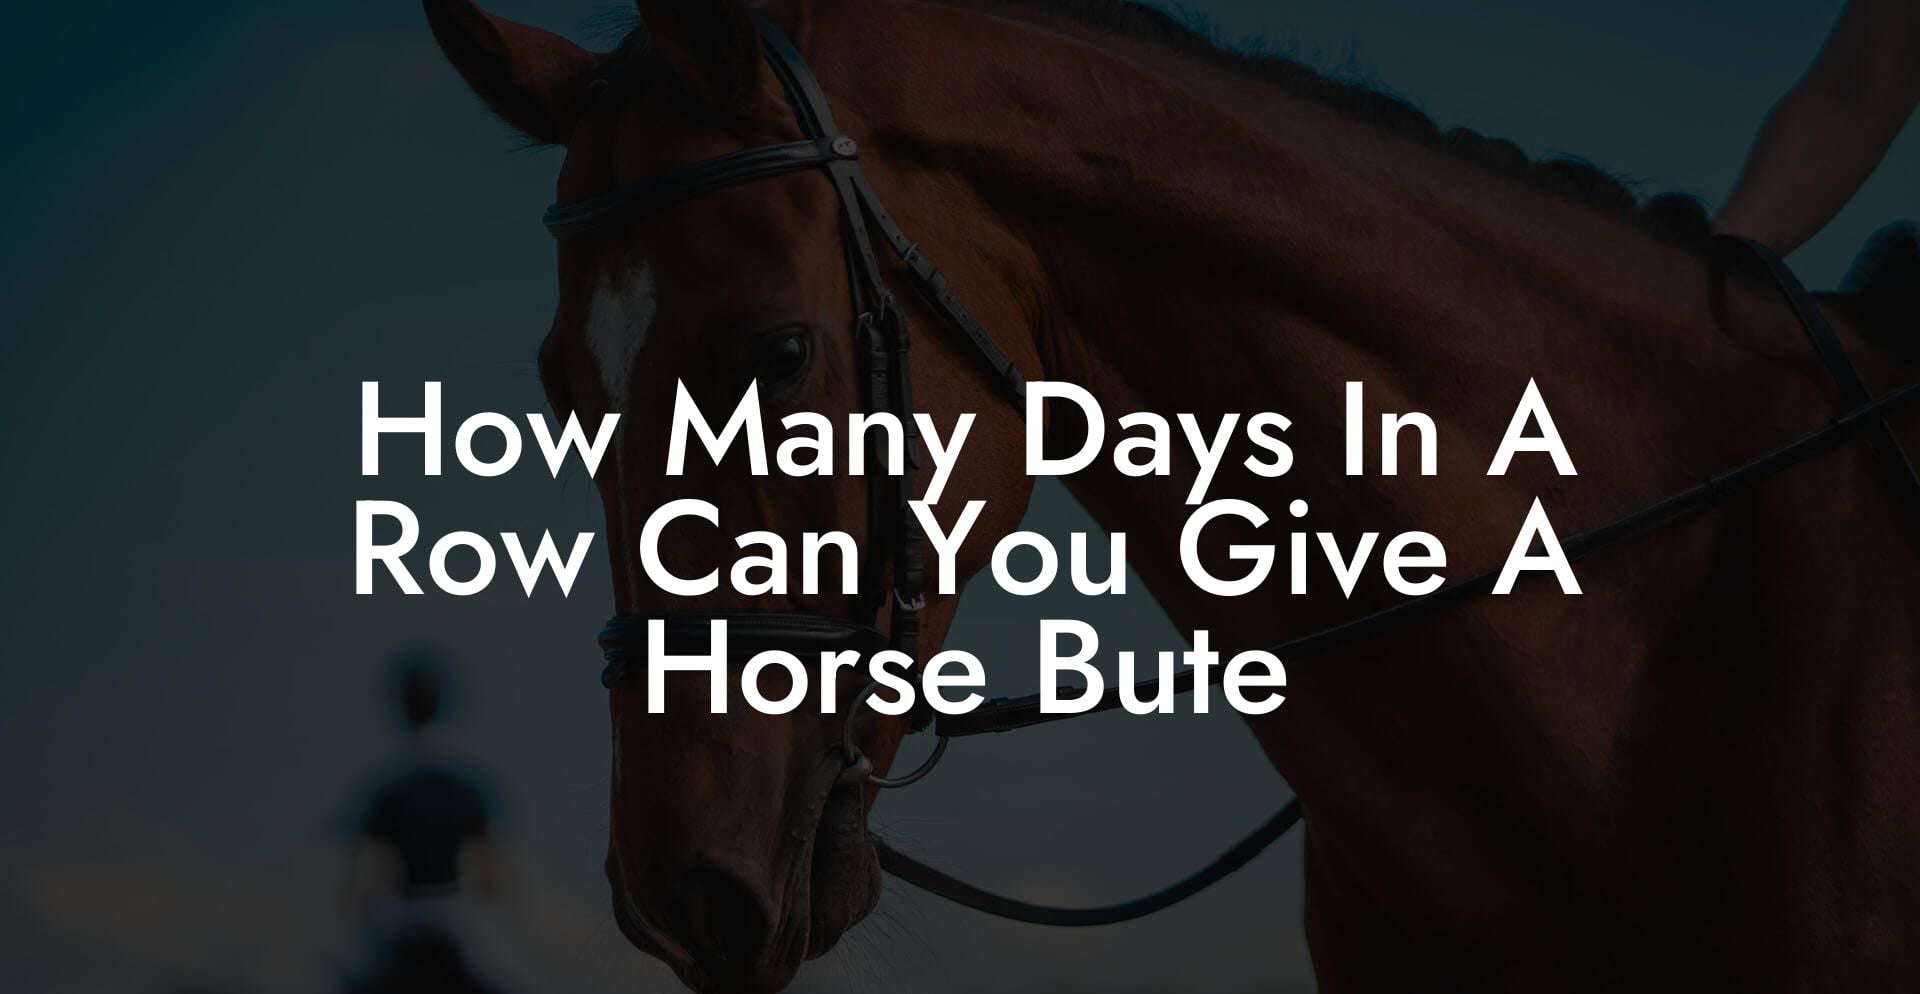 How Many Days In A Row Can You Give A Horse Bute